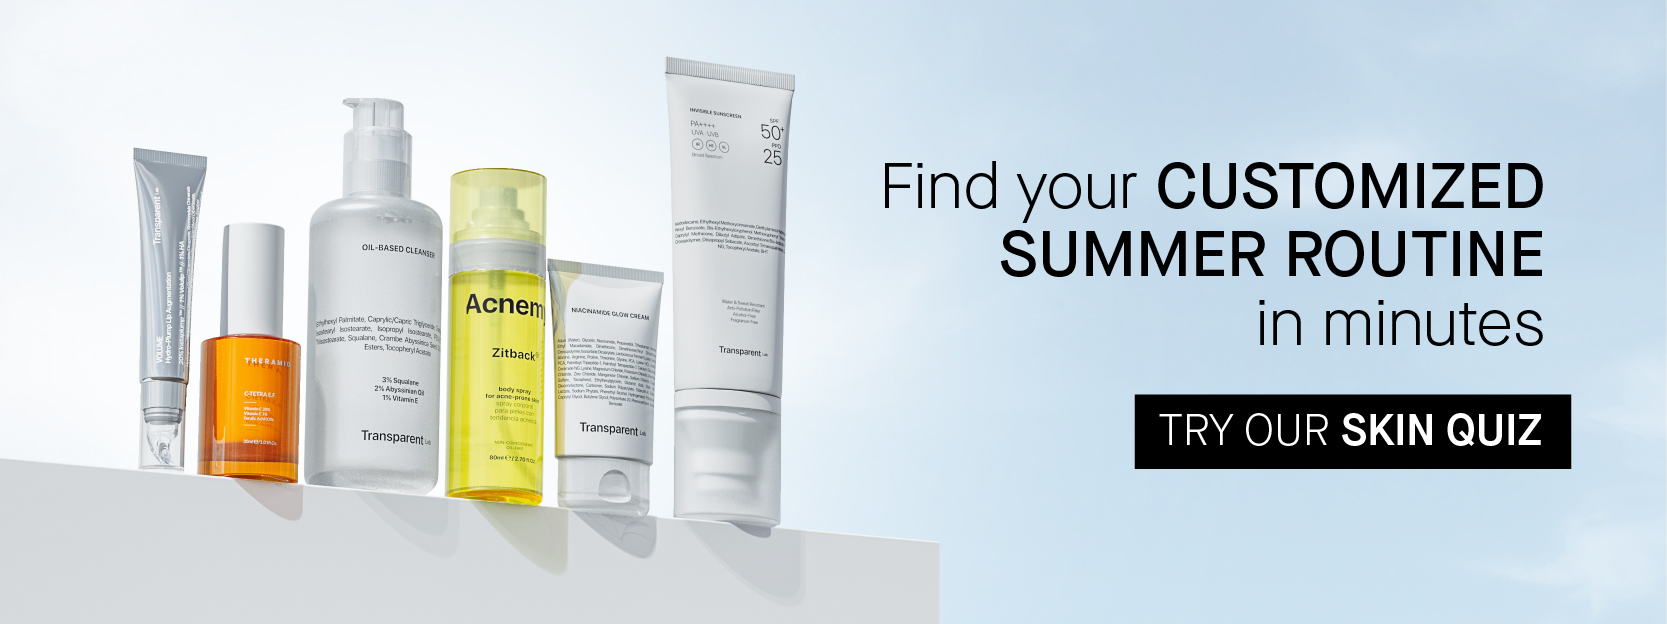 I Find your CUSTOMIZED ' SUMMER ROUTINE ,,,,,,,,,, in mMinutes E TRY OUR SKIN QUIZ 